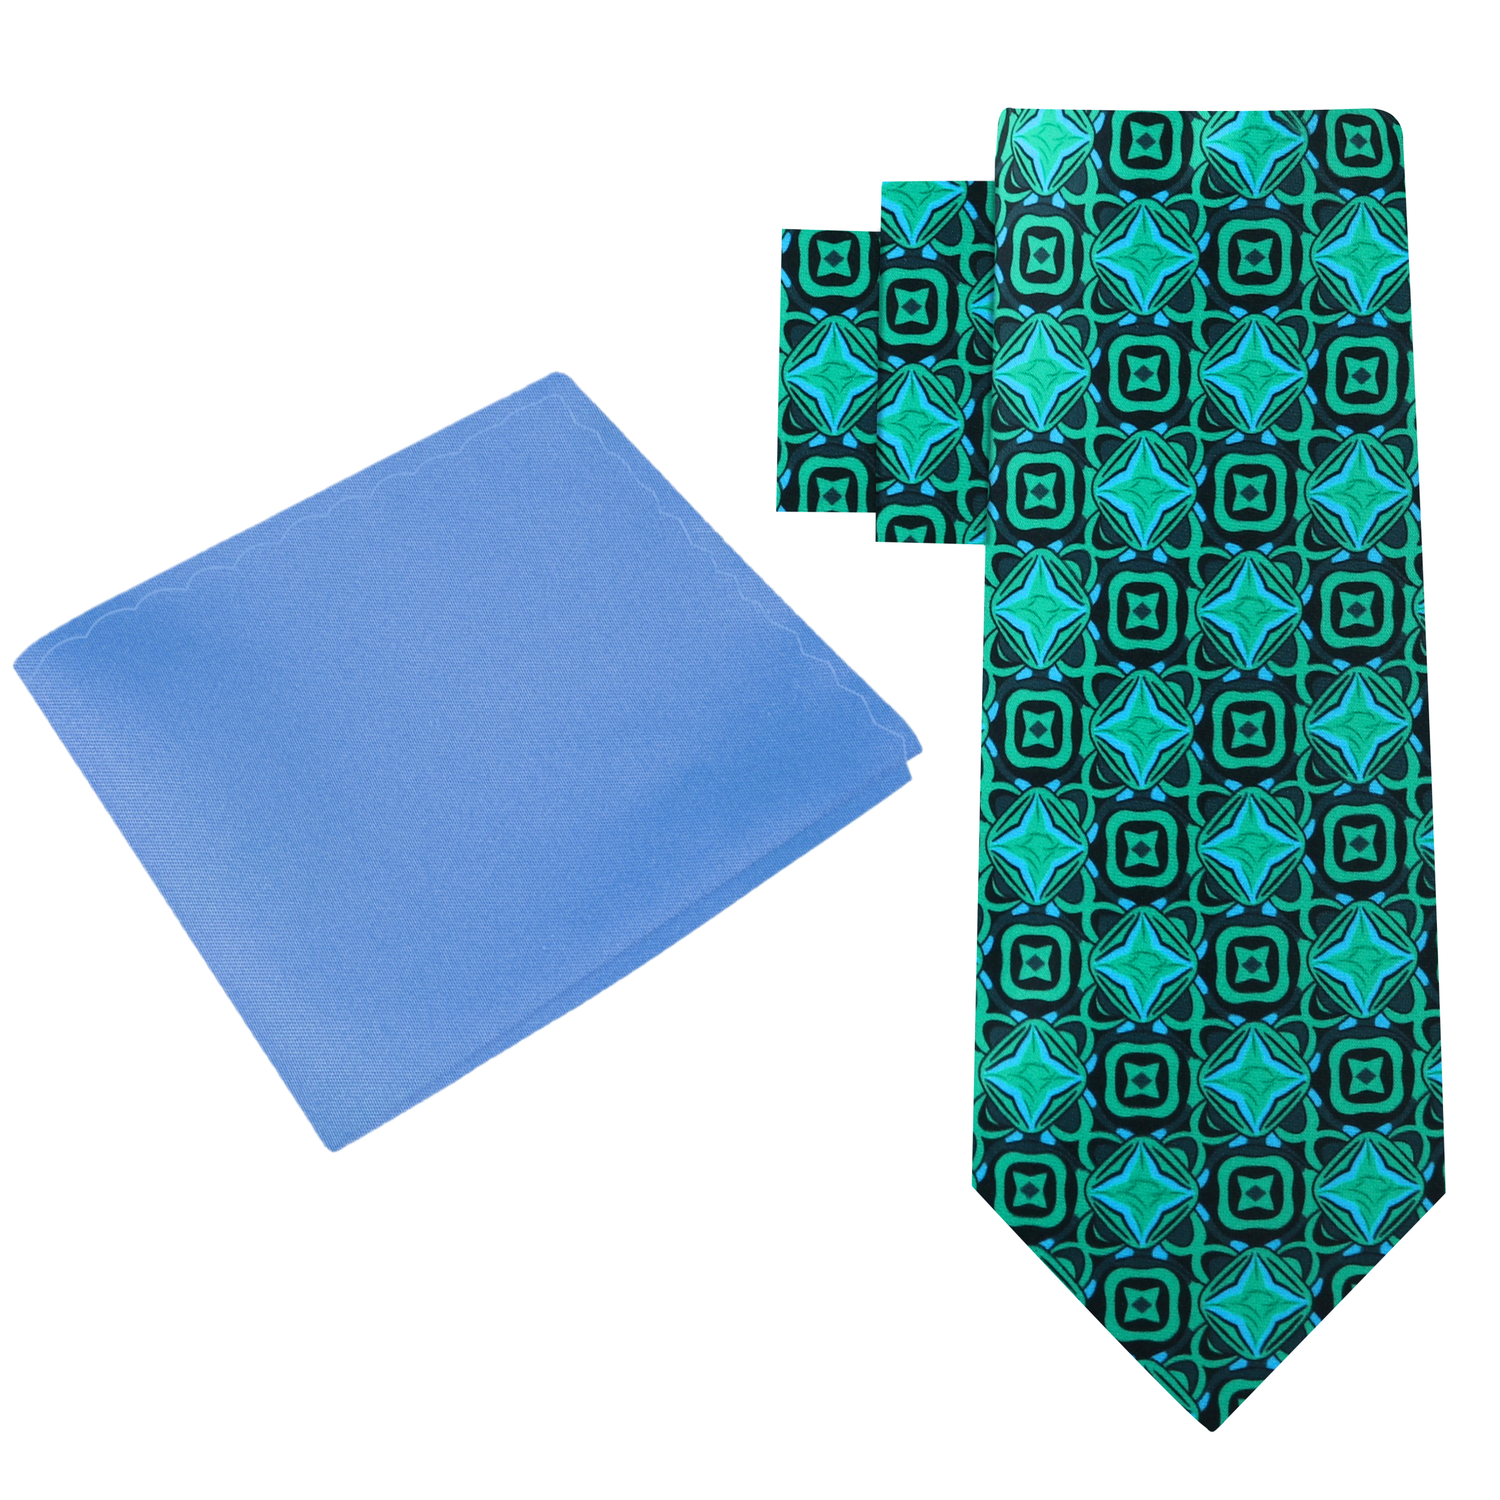 Alt View: Green Geometric Tie and Light Blue Square